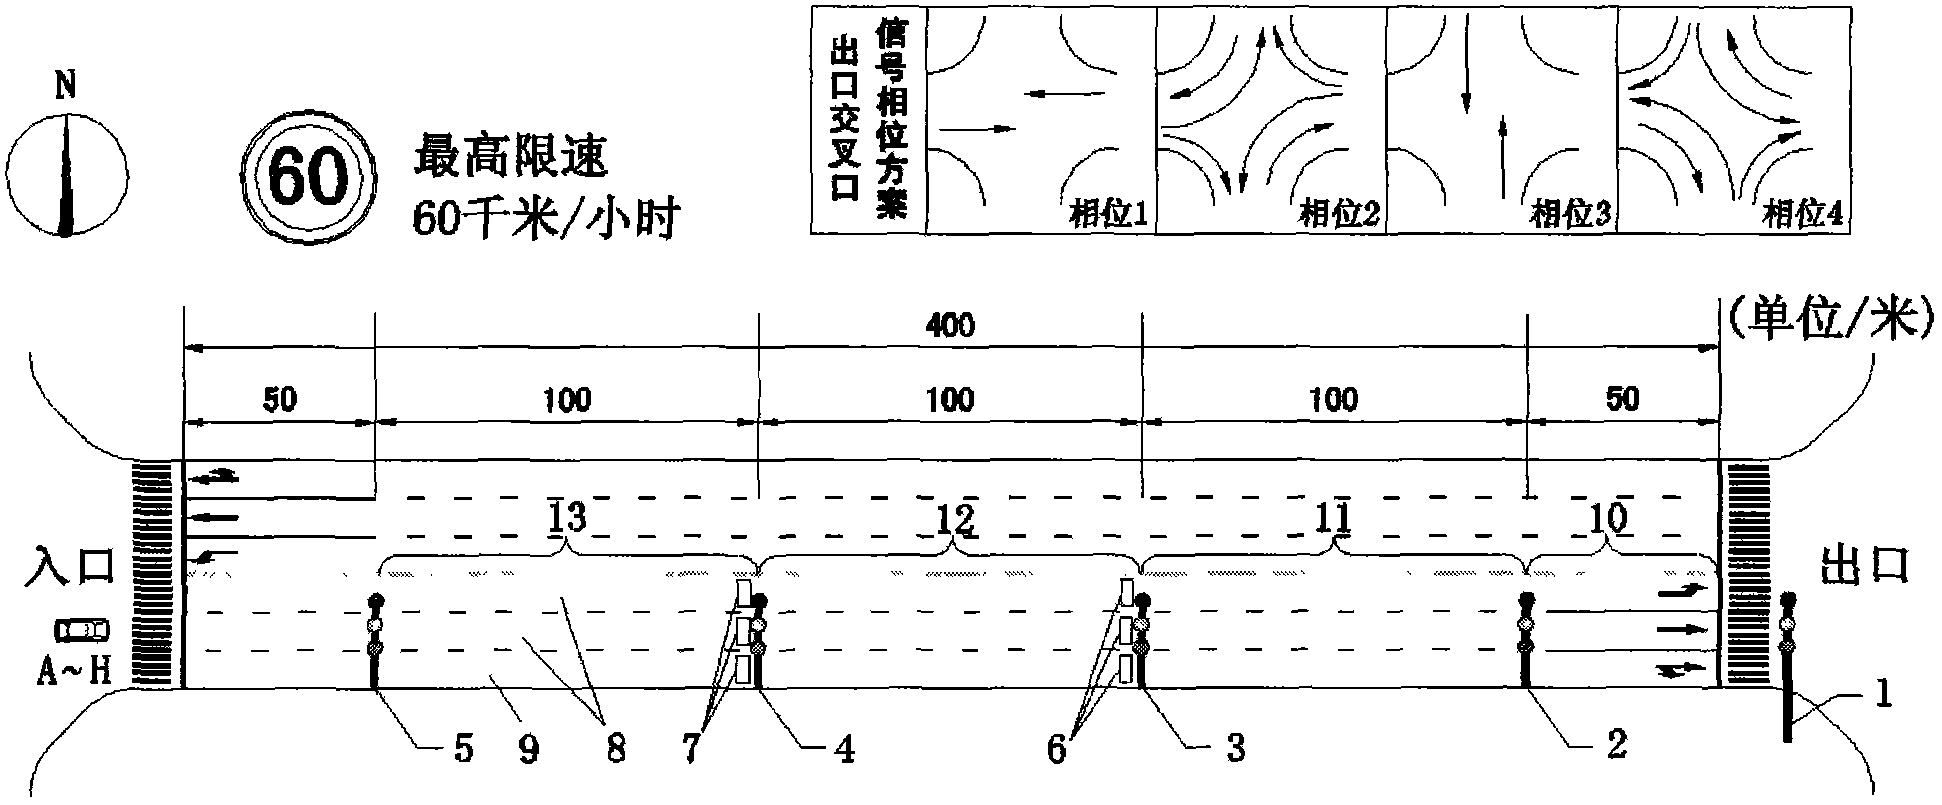 Method for coordinately controlling sub road section green wave induction and distribution